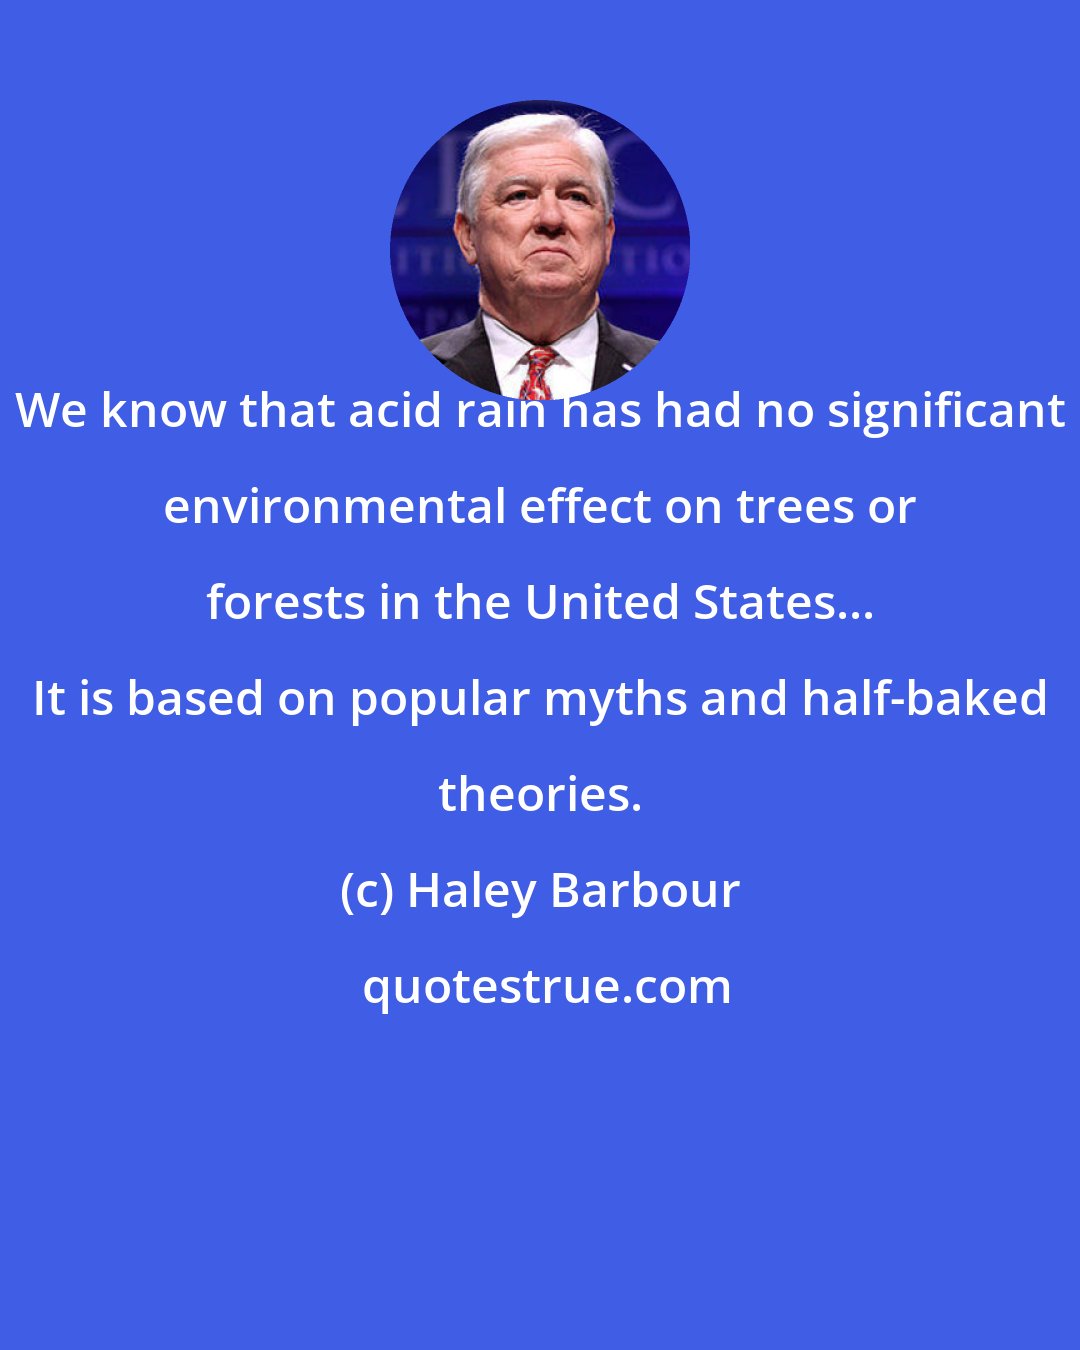 Haley Barbour: We know that acid rain has had no significant environmental effect on trees or forests in the United States... It is based on popular myths and half-baked theories.